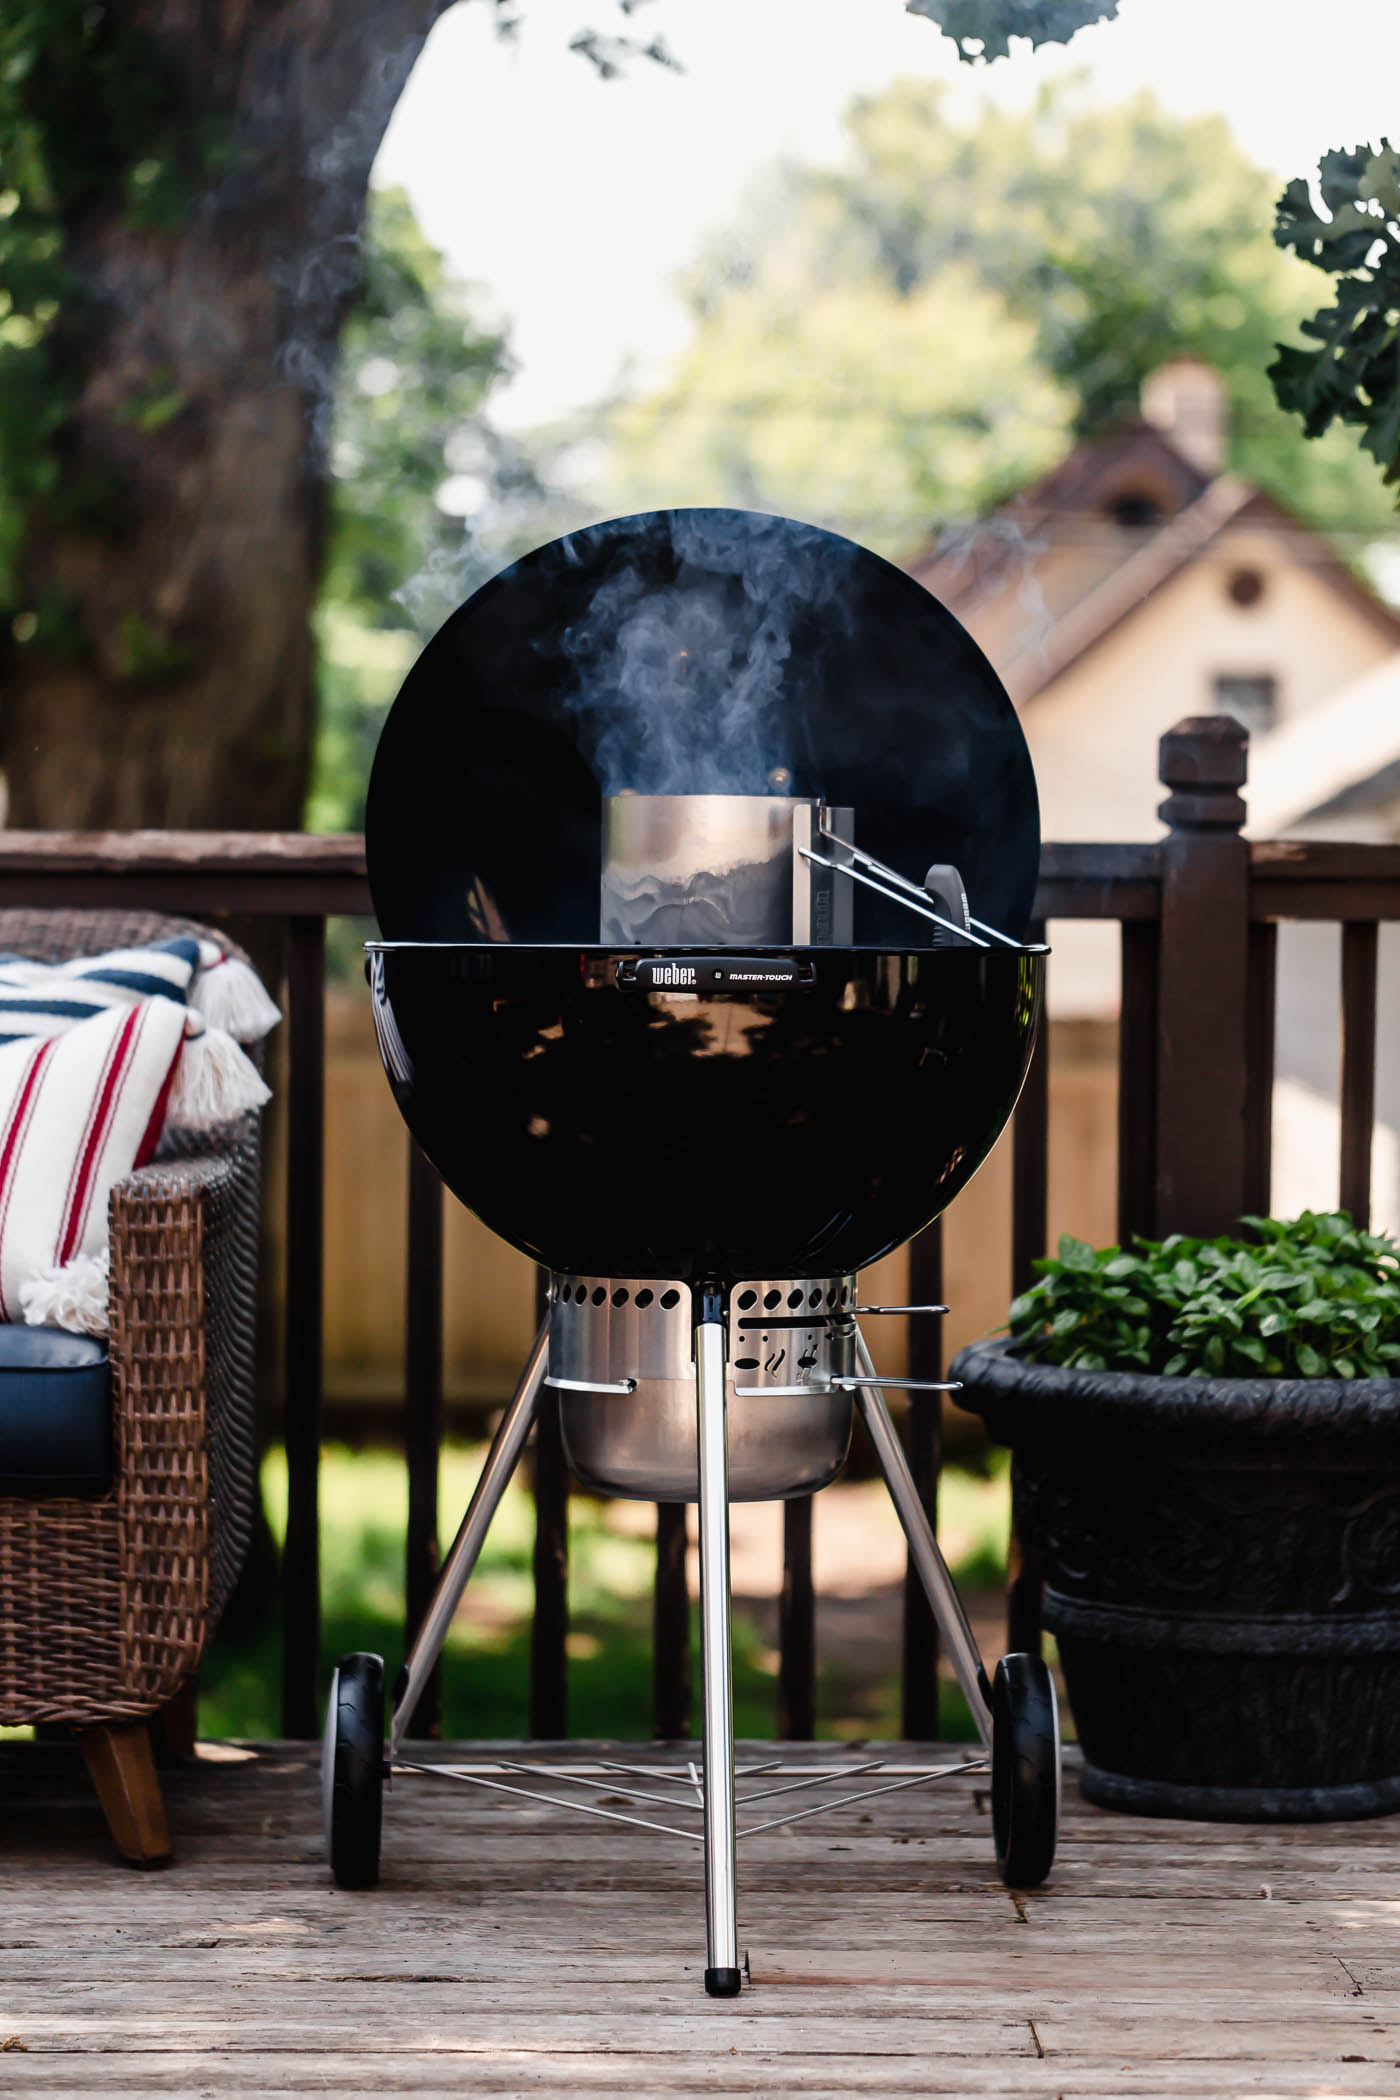 the 22-inch original weber grill preheating to make the perfect grilled steak!